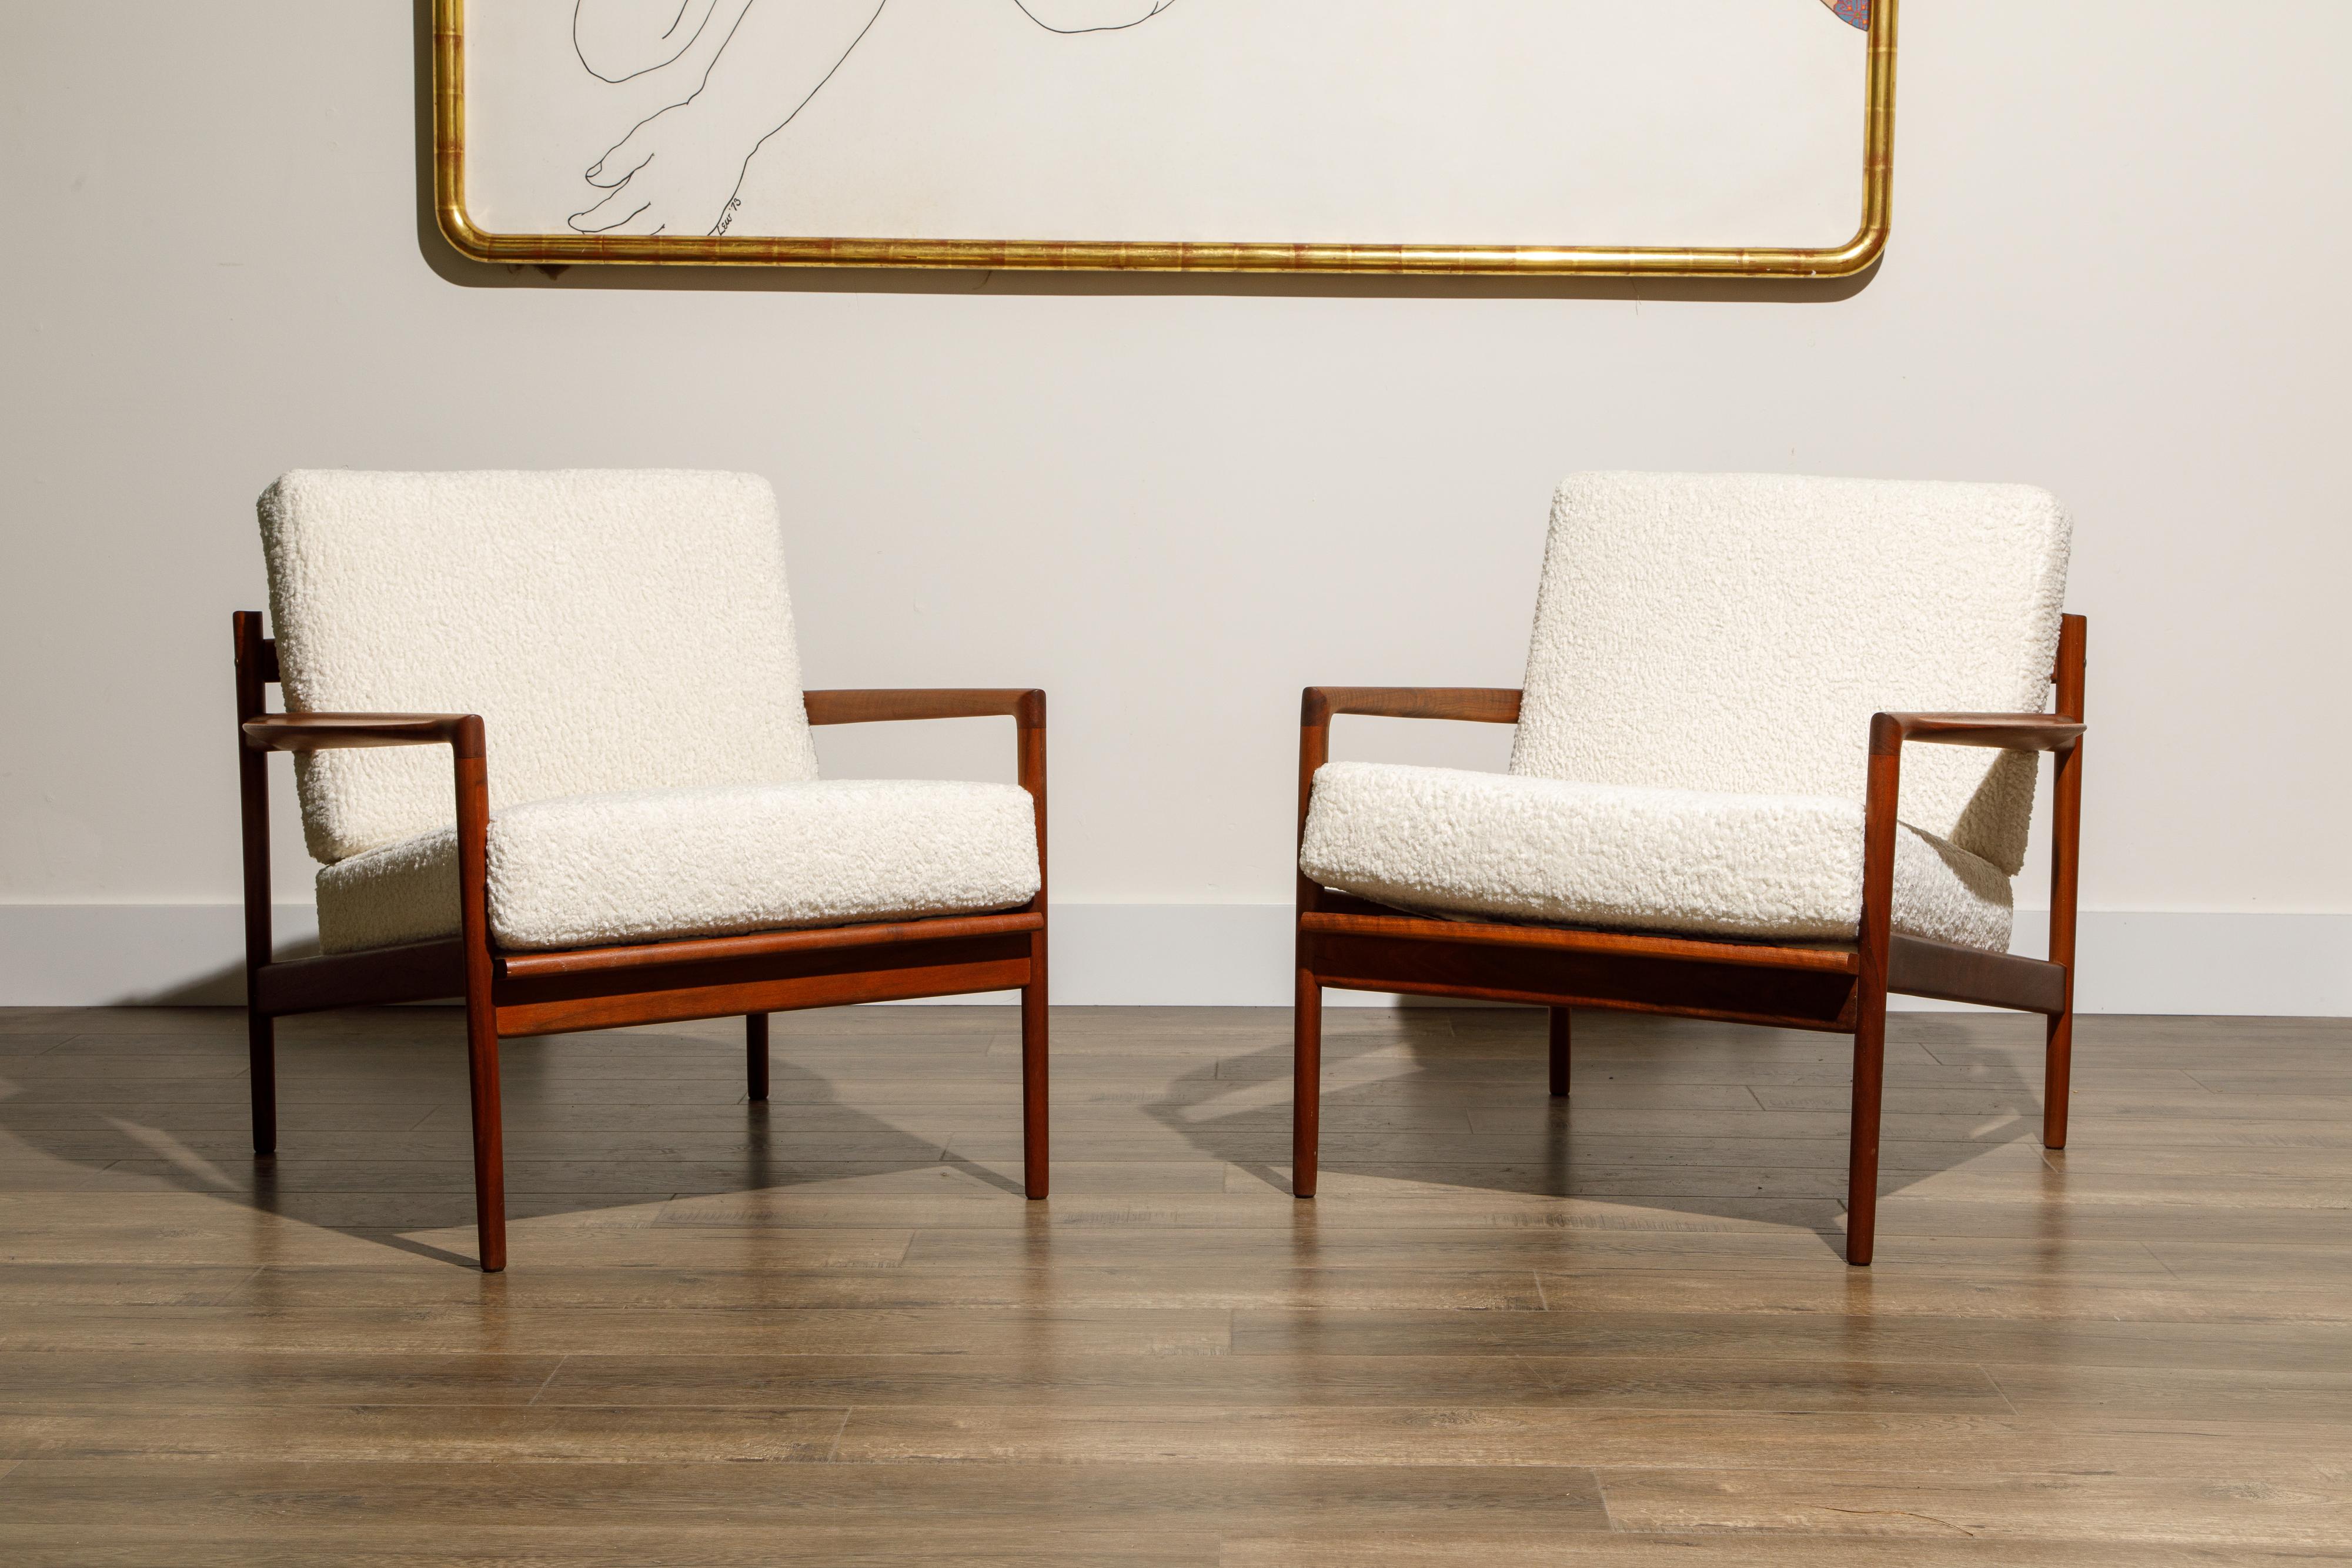 Newly reupholstered in gorgeous white bouclé fabric, this pair of lounge chairs by IB Kofod-Larsen for Selig, circa early 1960s, feature beautiful teak frames with on-trend slatted backs. Incredible designer details abound, from the sculpted arms,